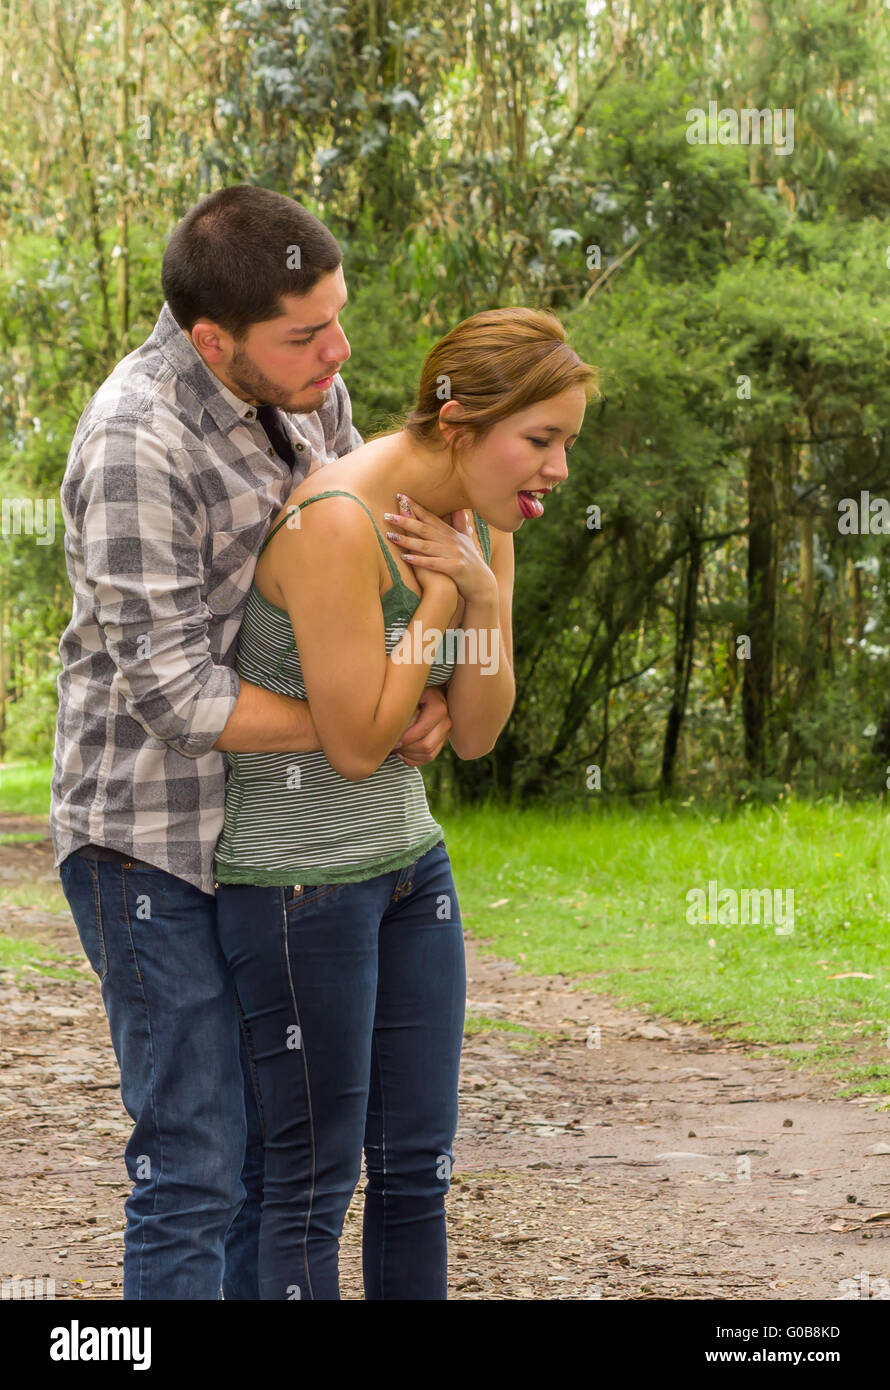 Young Woman Choking With Man Standing Behind Performing Heimlich Maneuver Park Environment And 